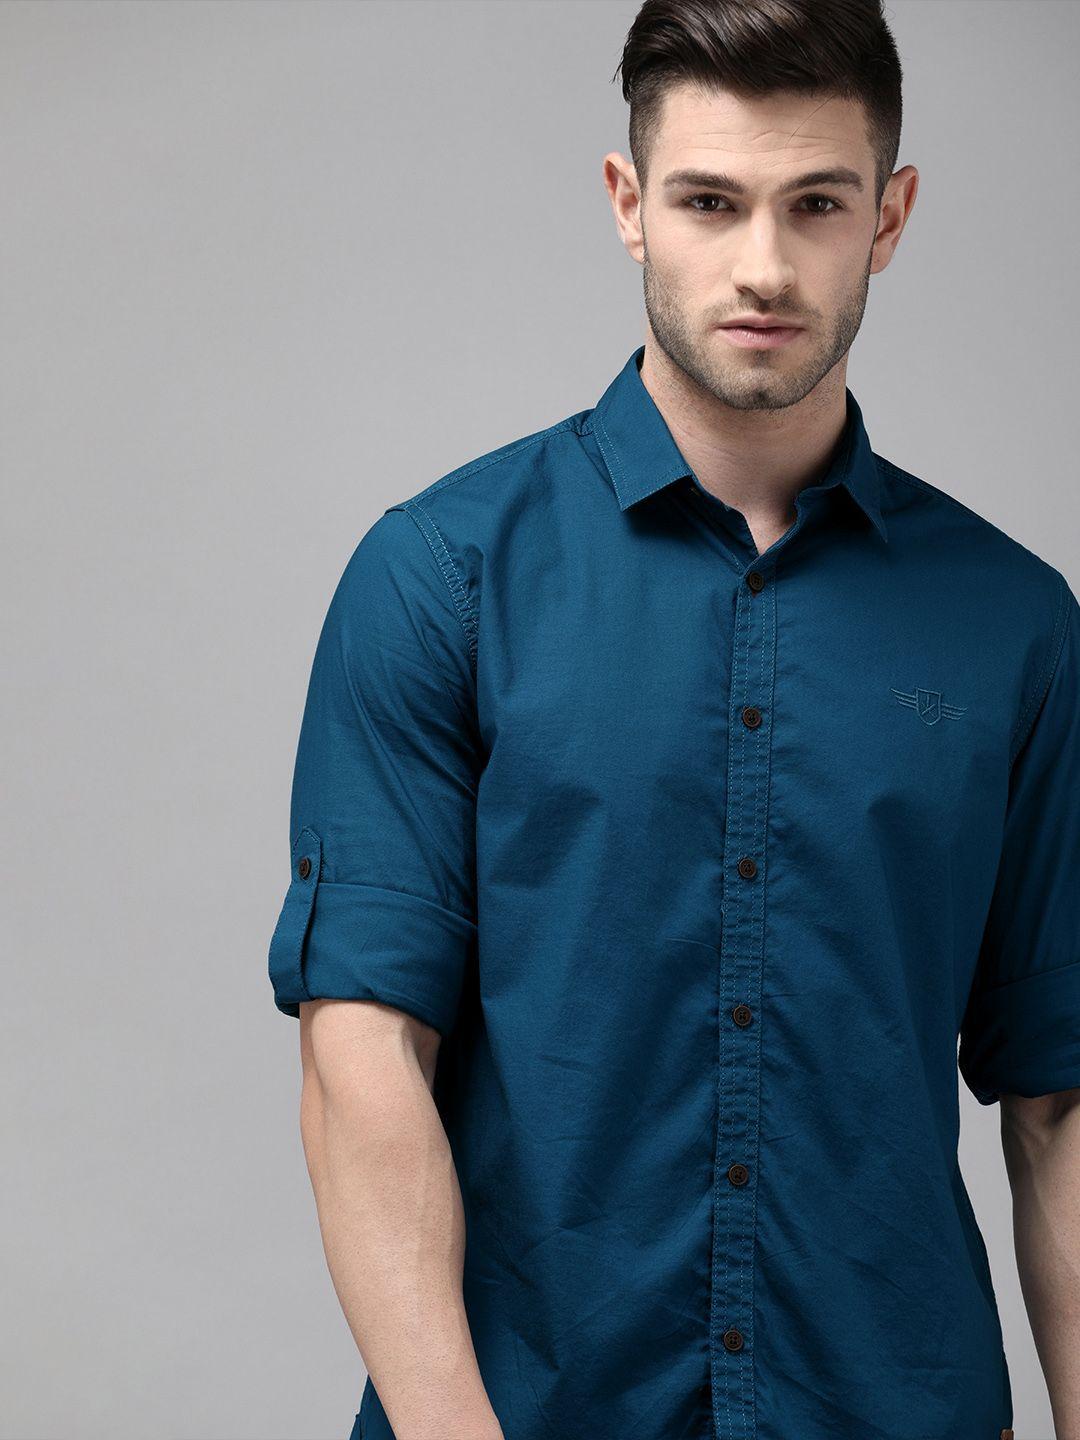 roadster men teal blue slim fit solid sustainable casual shirt